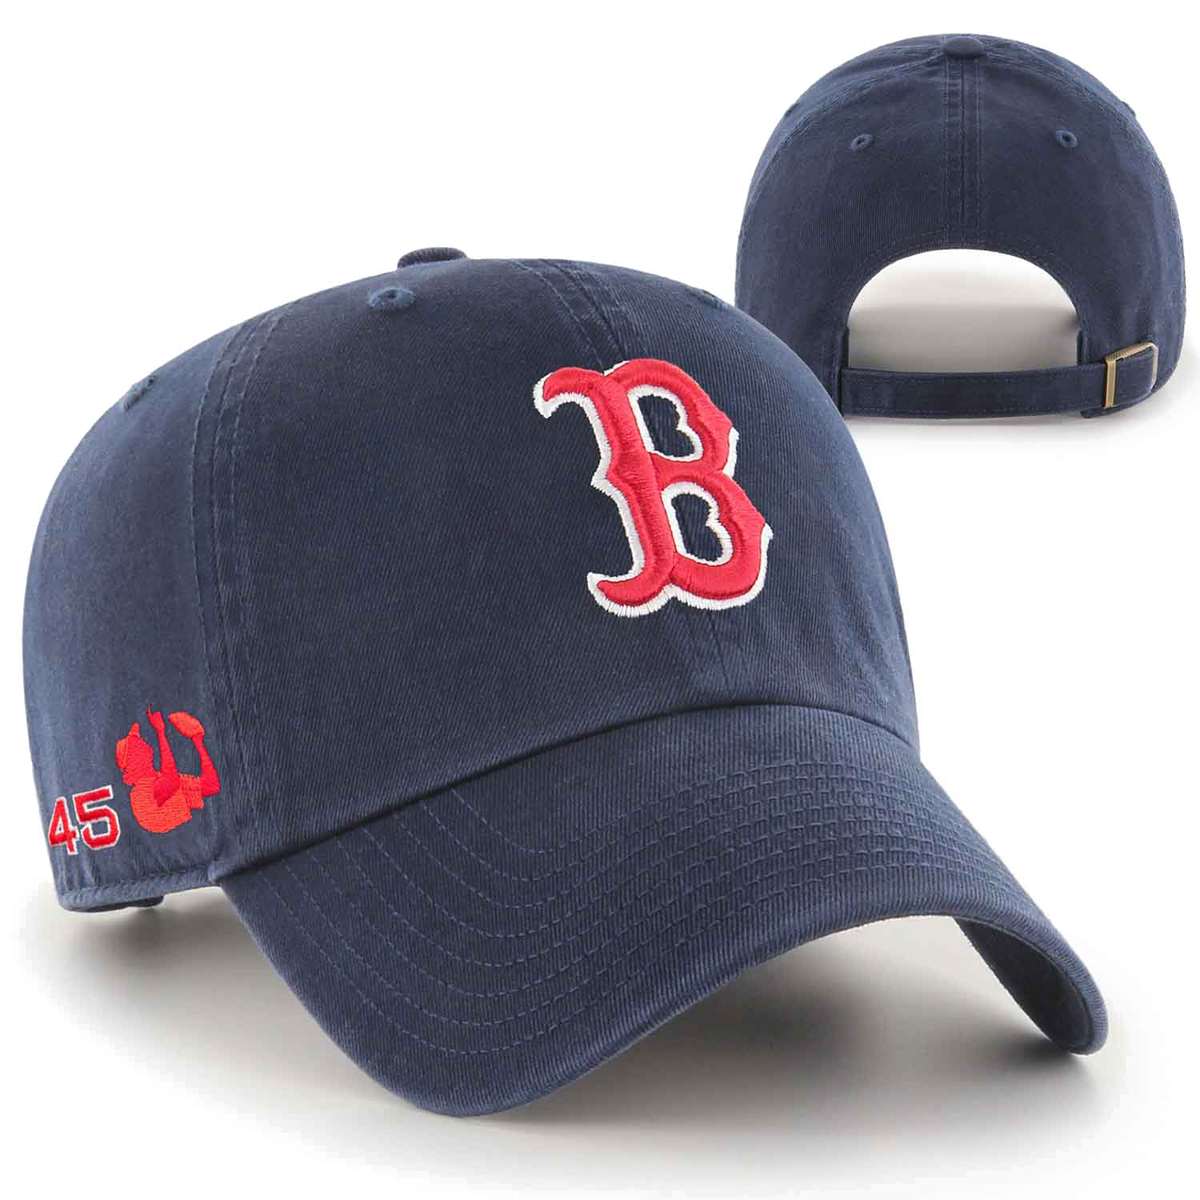 mitchell and ness red sox hat